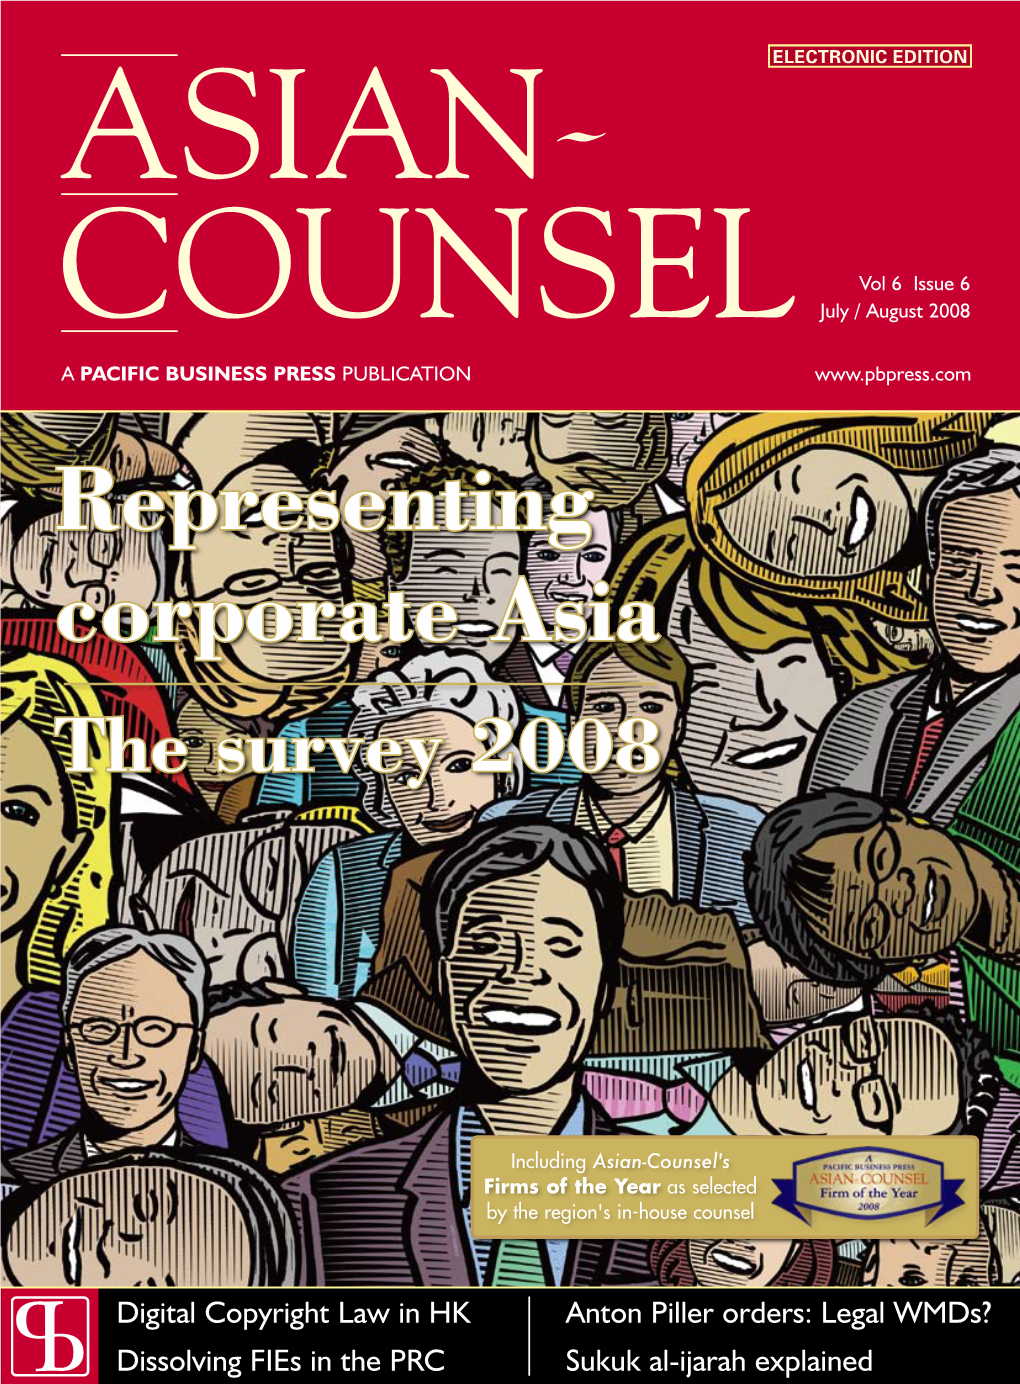 Asian-Counsel's Firms of the Year As Selected by the Region's In-House Counsel